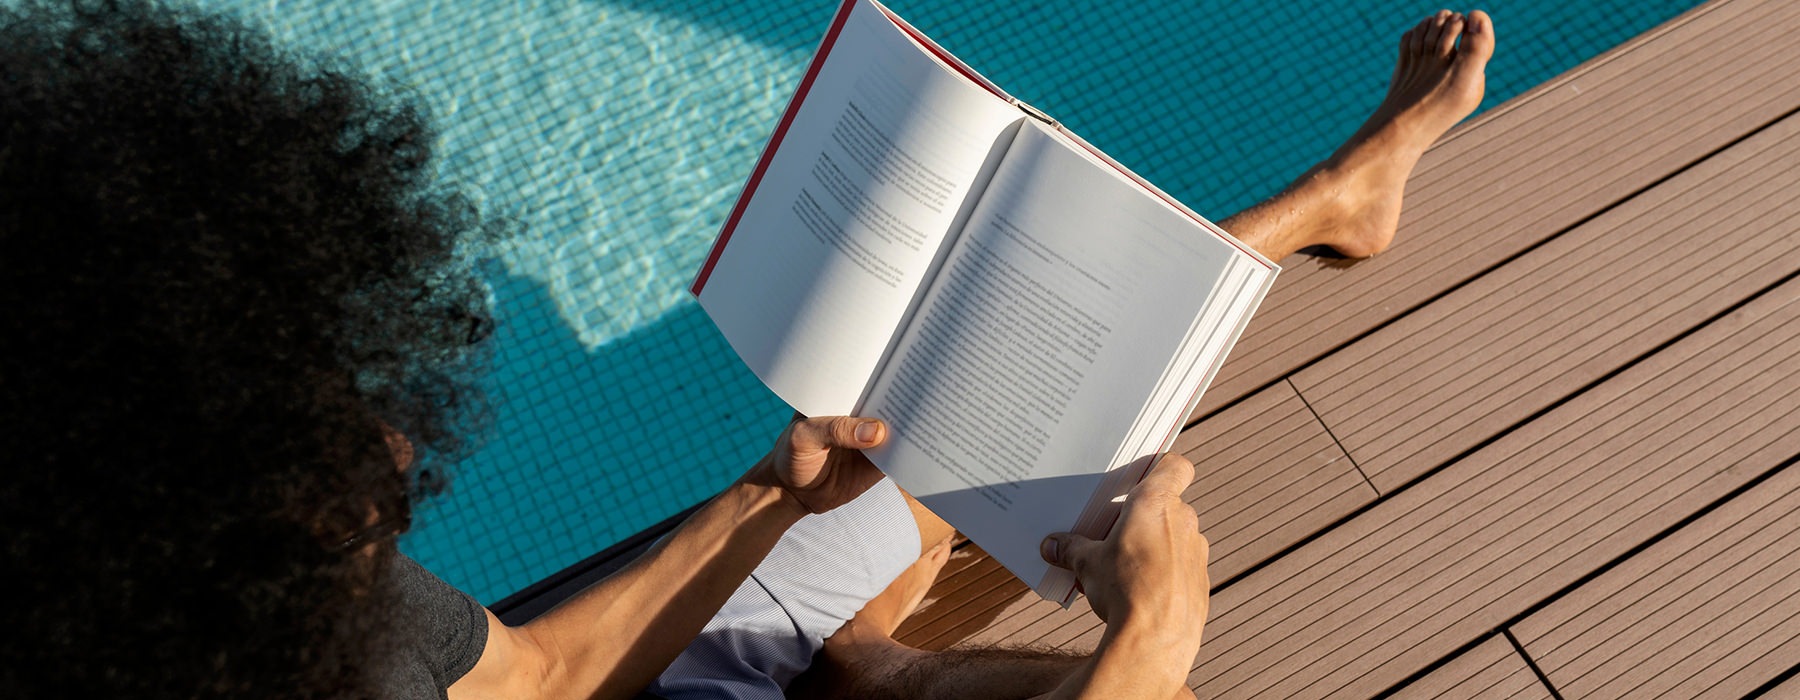 man reading book by pool